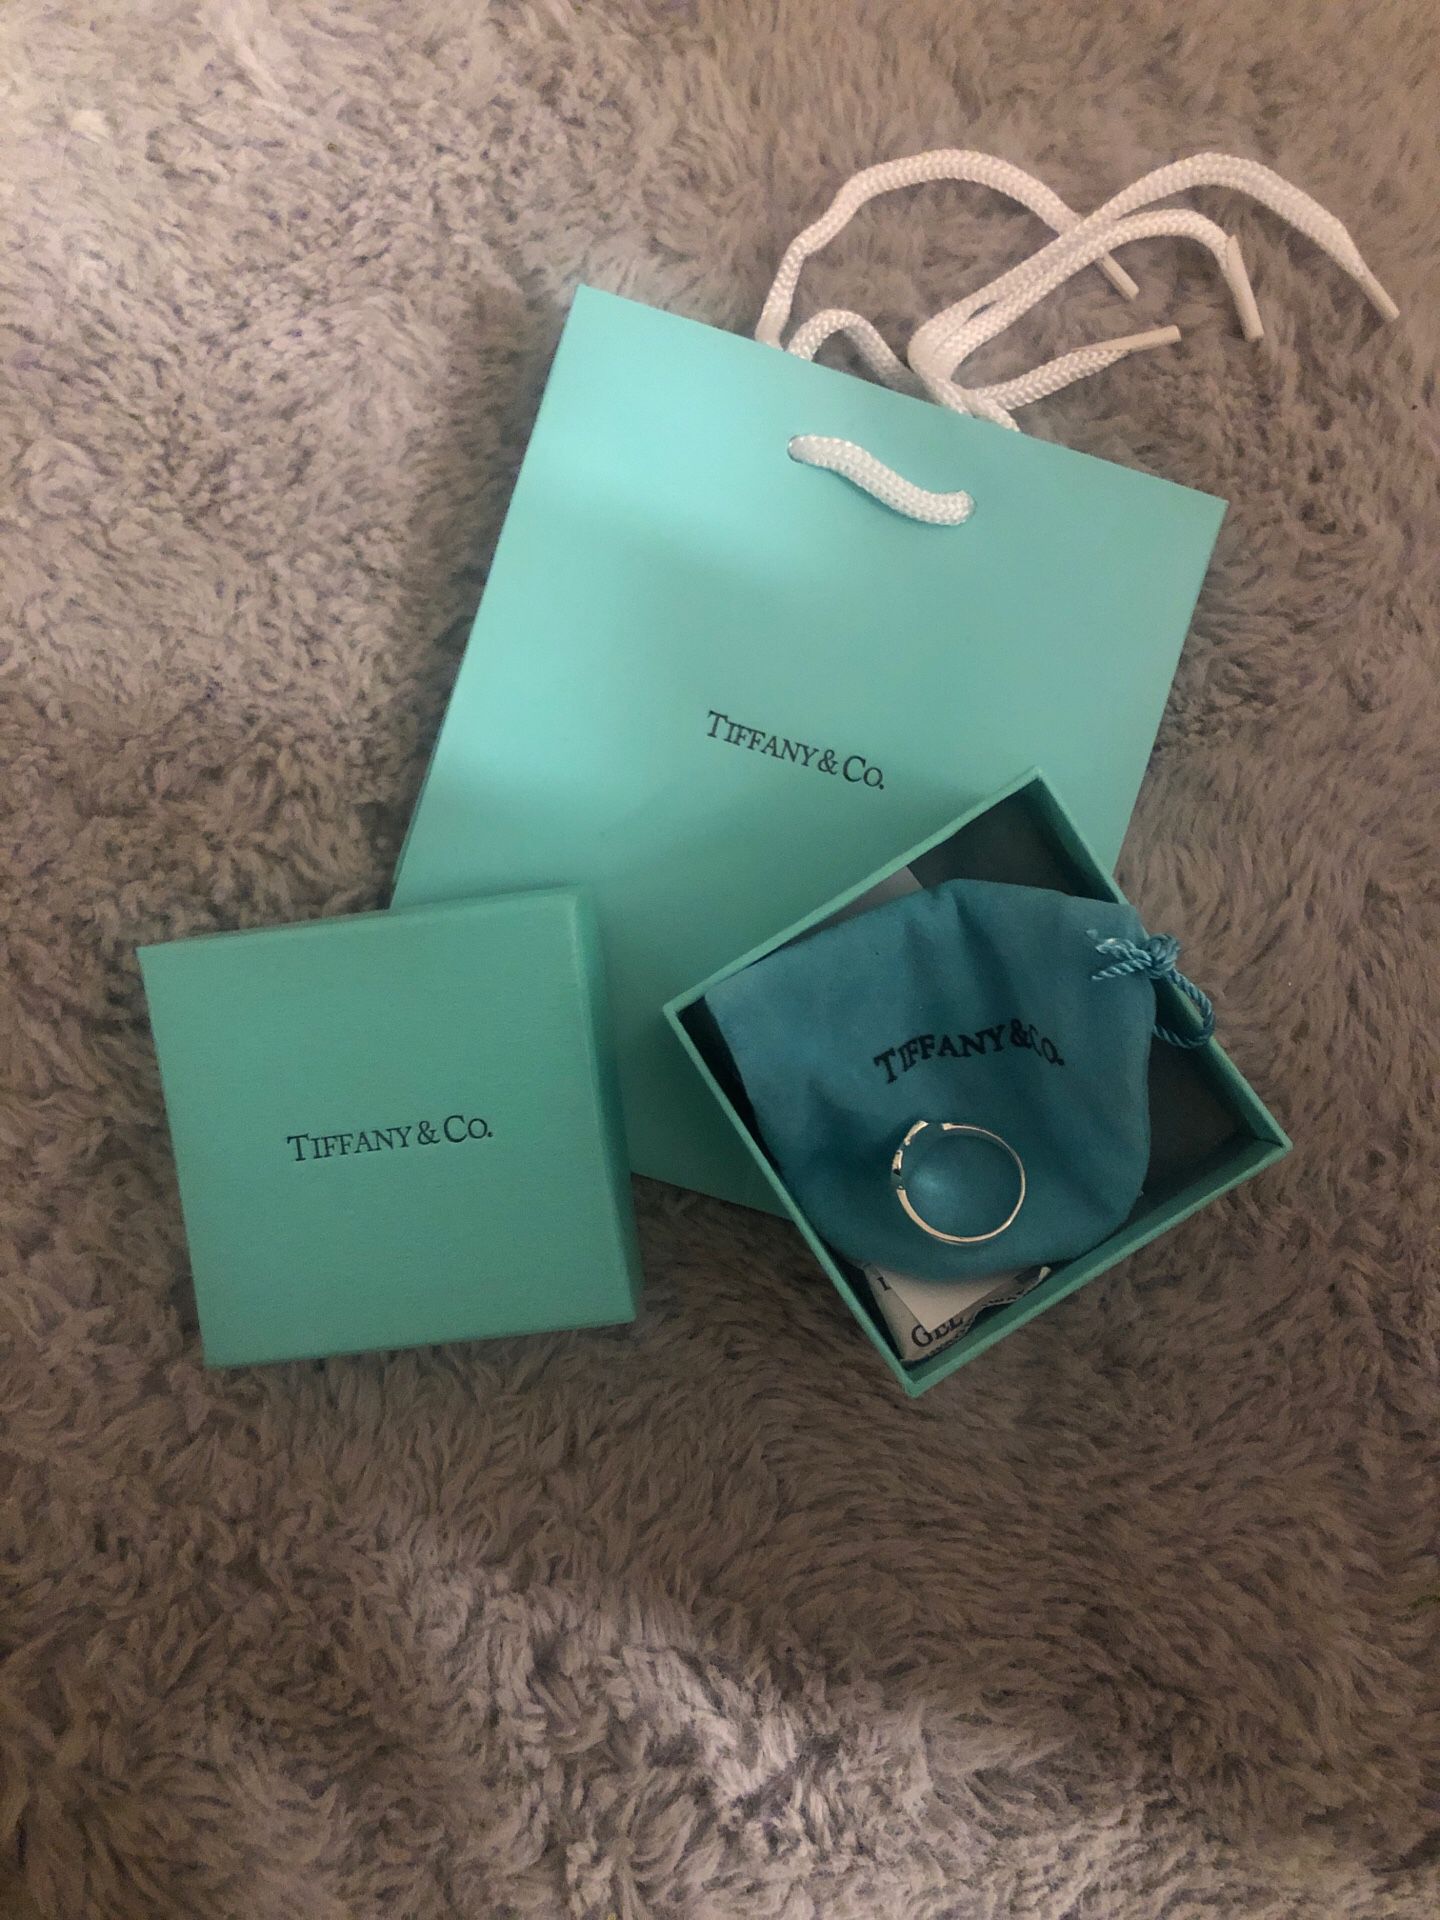 Tiffany and company new ring never used got as gift